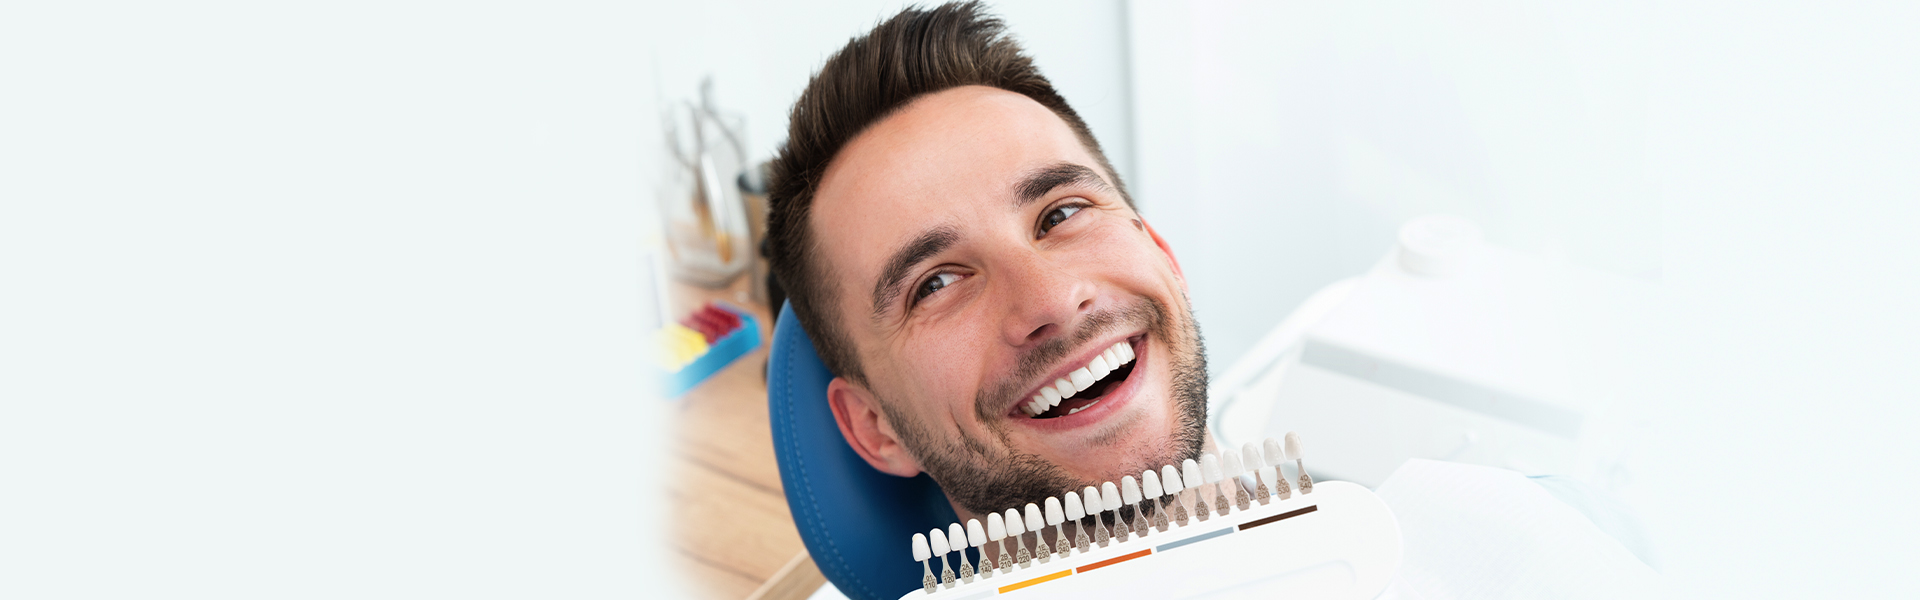 A Guide to Dental Veneers and How to Use Them